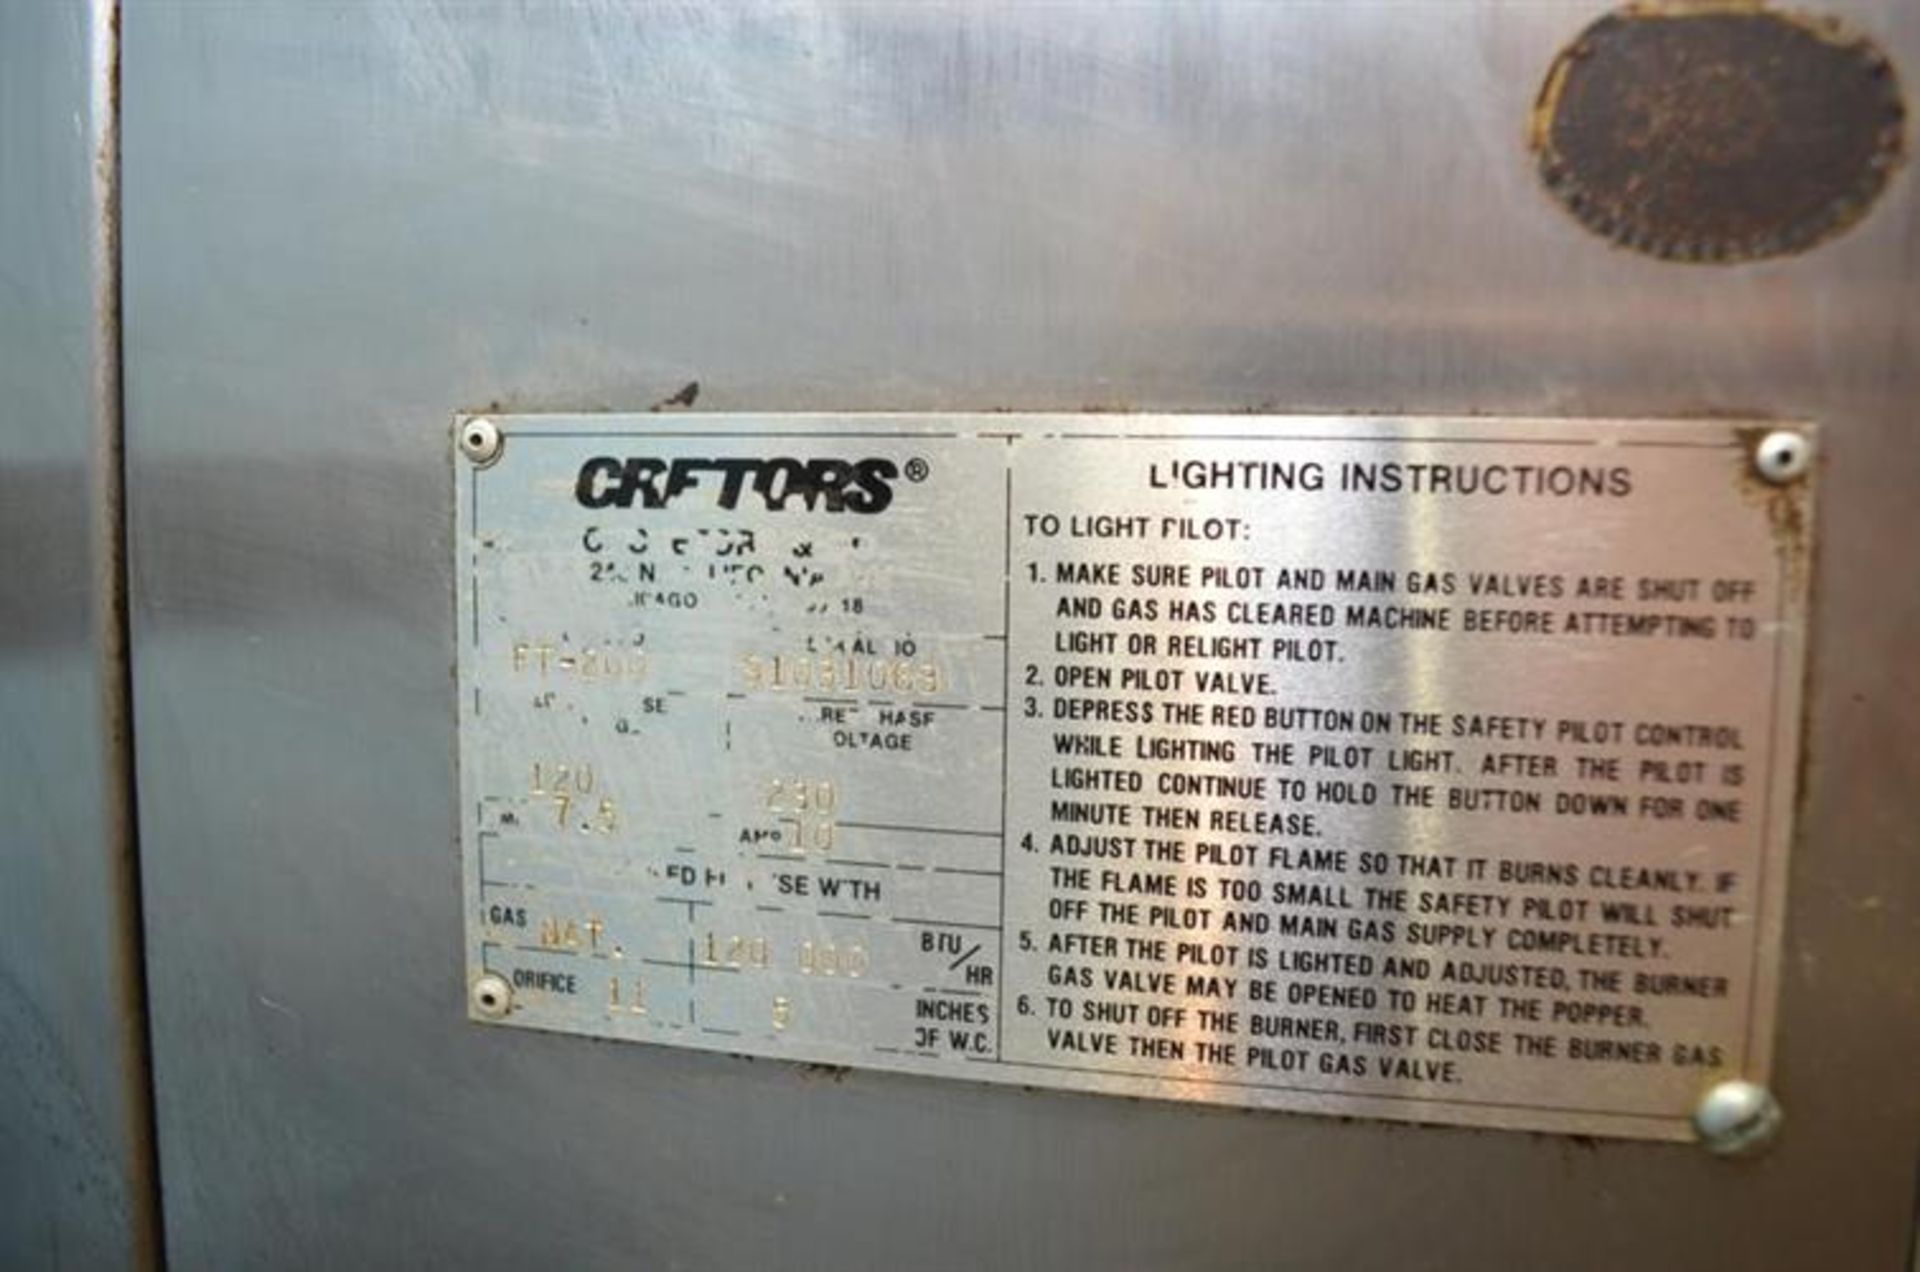 Cretors FT200 200 lb/hr Continuous Dry Popper - Natural gas fired - 120,000 btu/hr - Serial#91031063 - Image 13 of 13